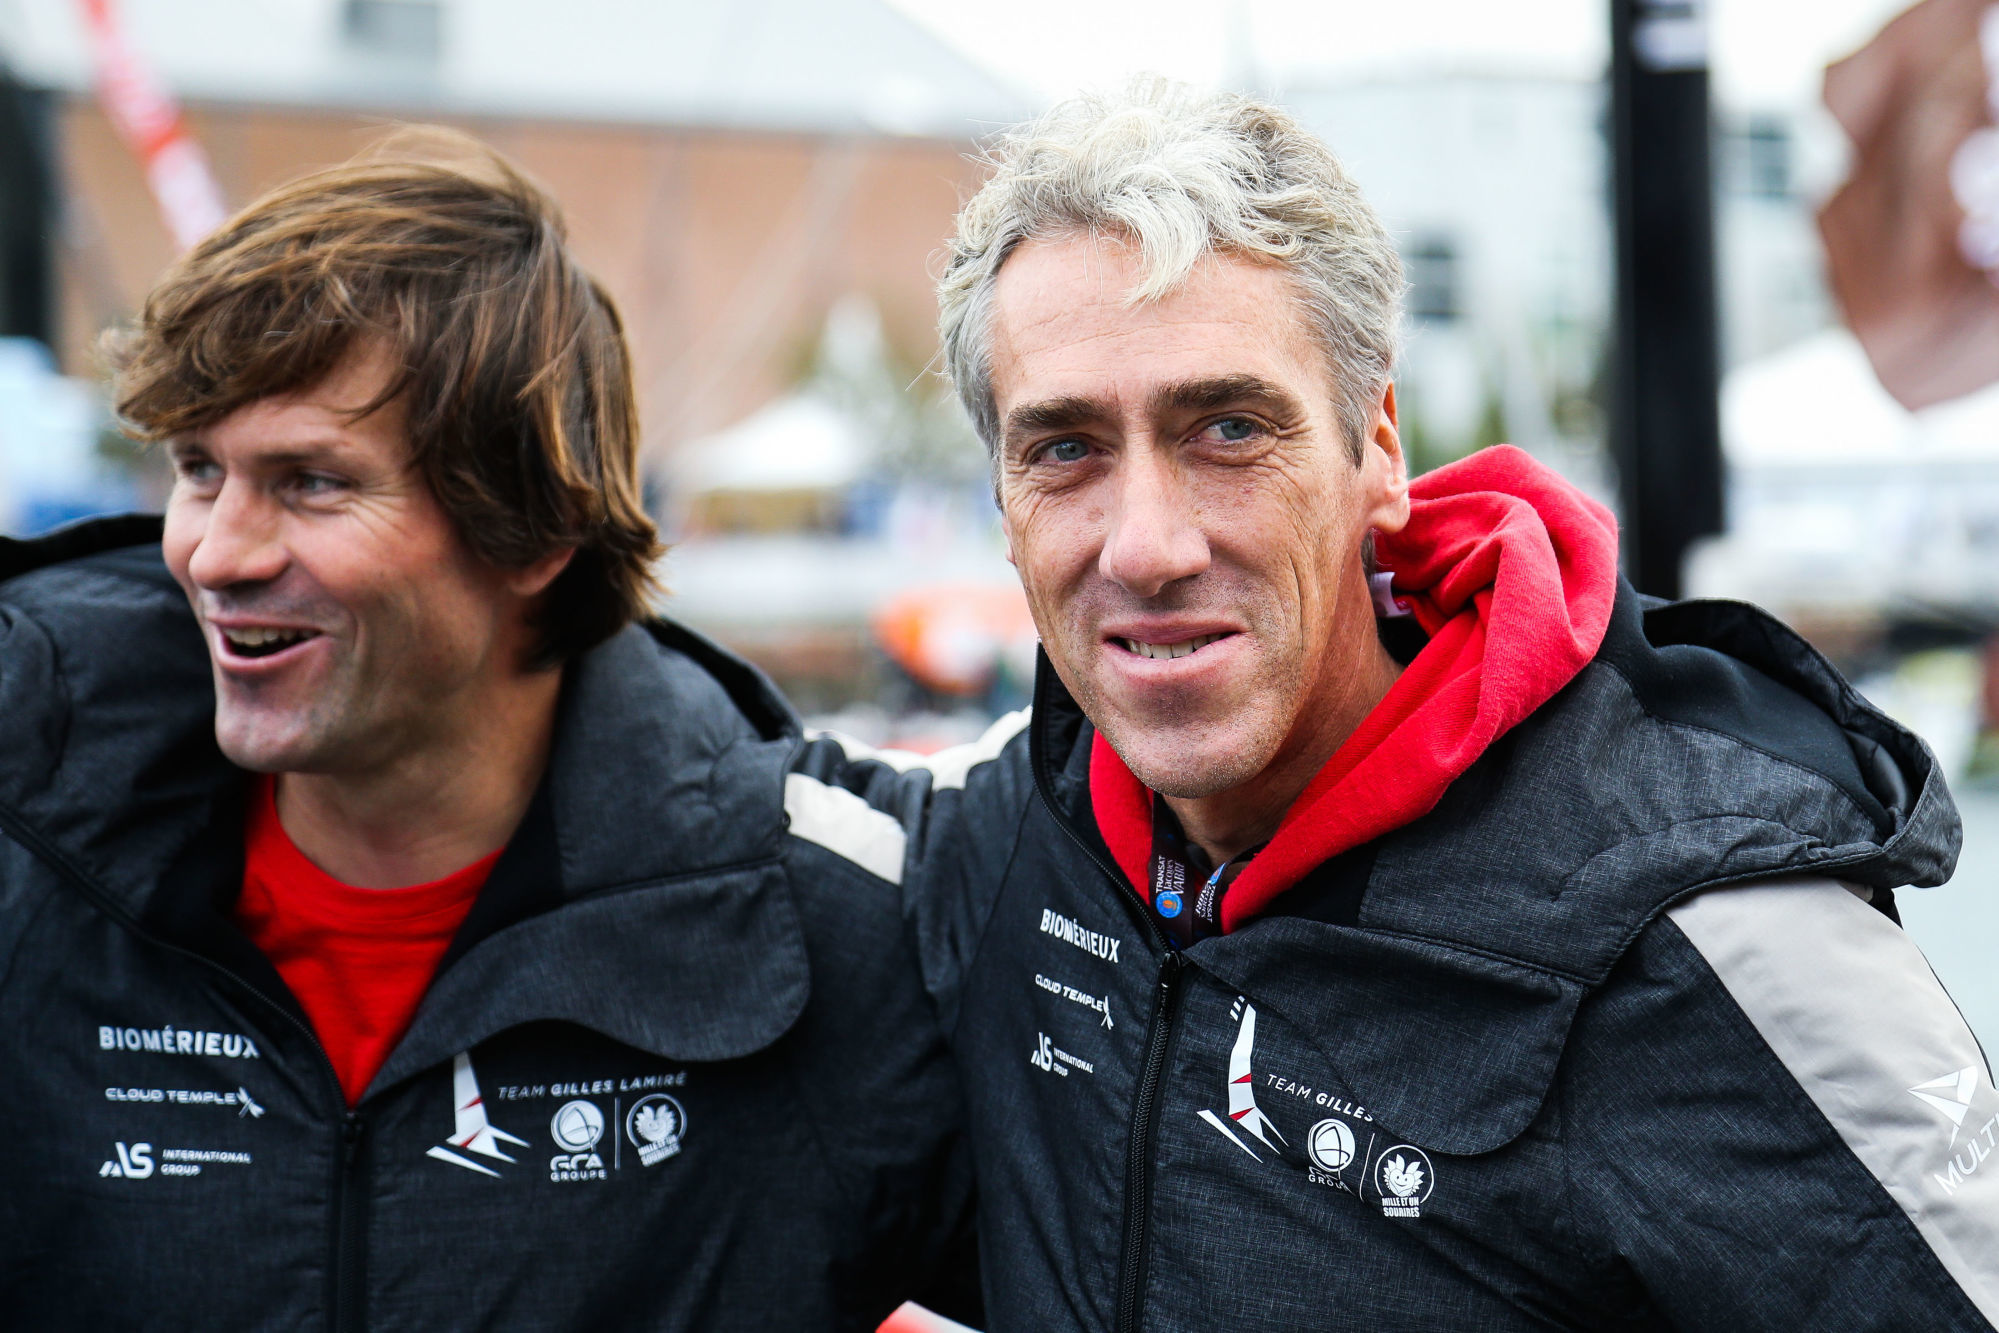 Antoine CARPENTIER of Multi 50 Groupe CGA Mille et un sourires and Gilles LAMIRE of Multi 50 Groupe CGA Mille et un sourires during the Transat Jacques Vabre on October 24, 2019 in Le Havre, France. (Photo by Maxime Le Pihif/Icon Sport) - Antoine CARPENTIER - Gilles LAMIRE